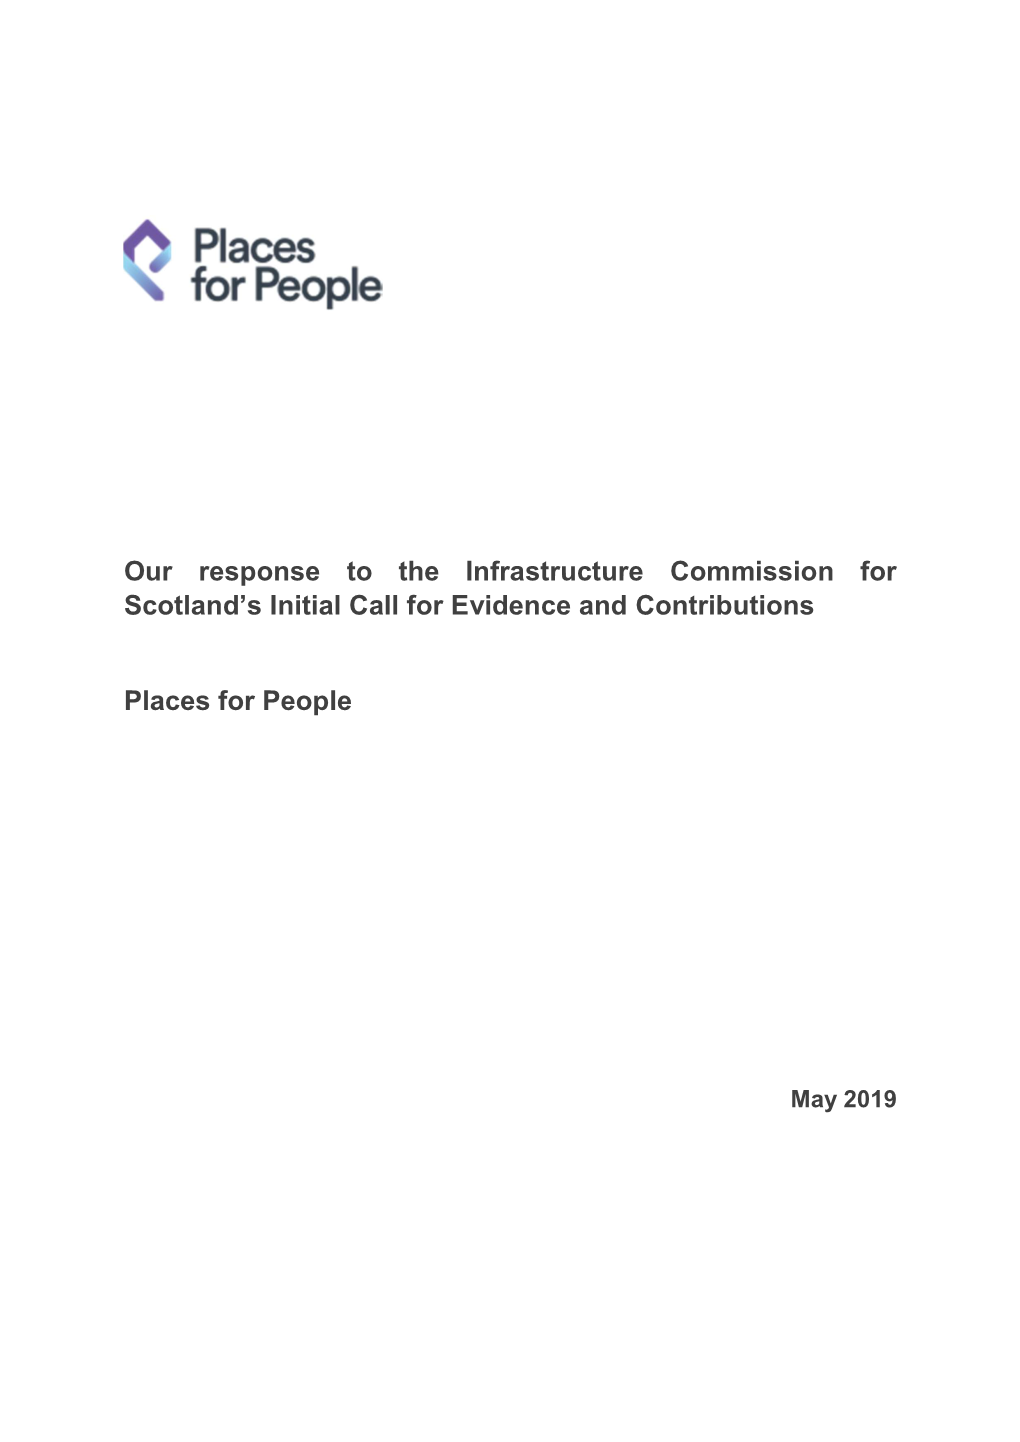 Our Response to the Infrastructure Commission for Scotland's Initial